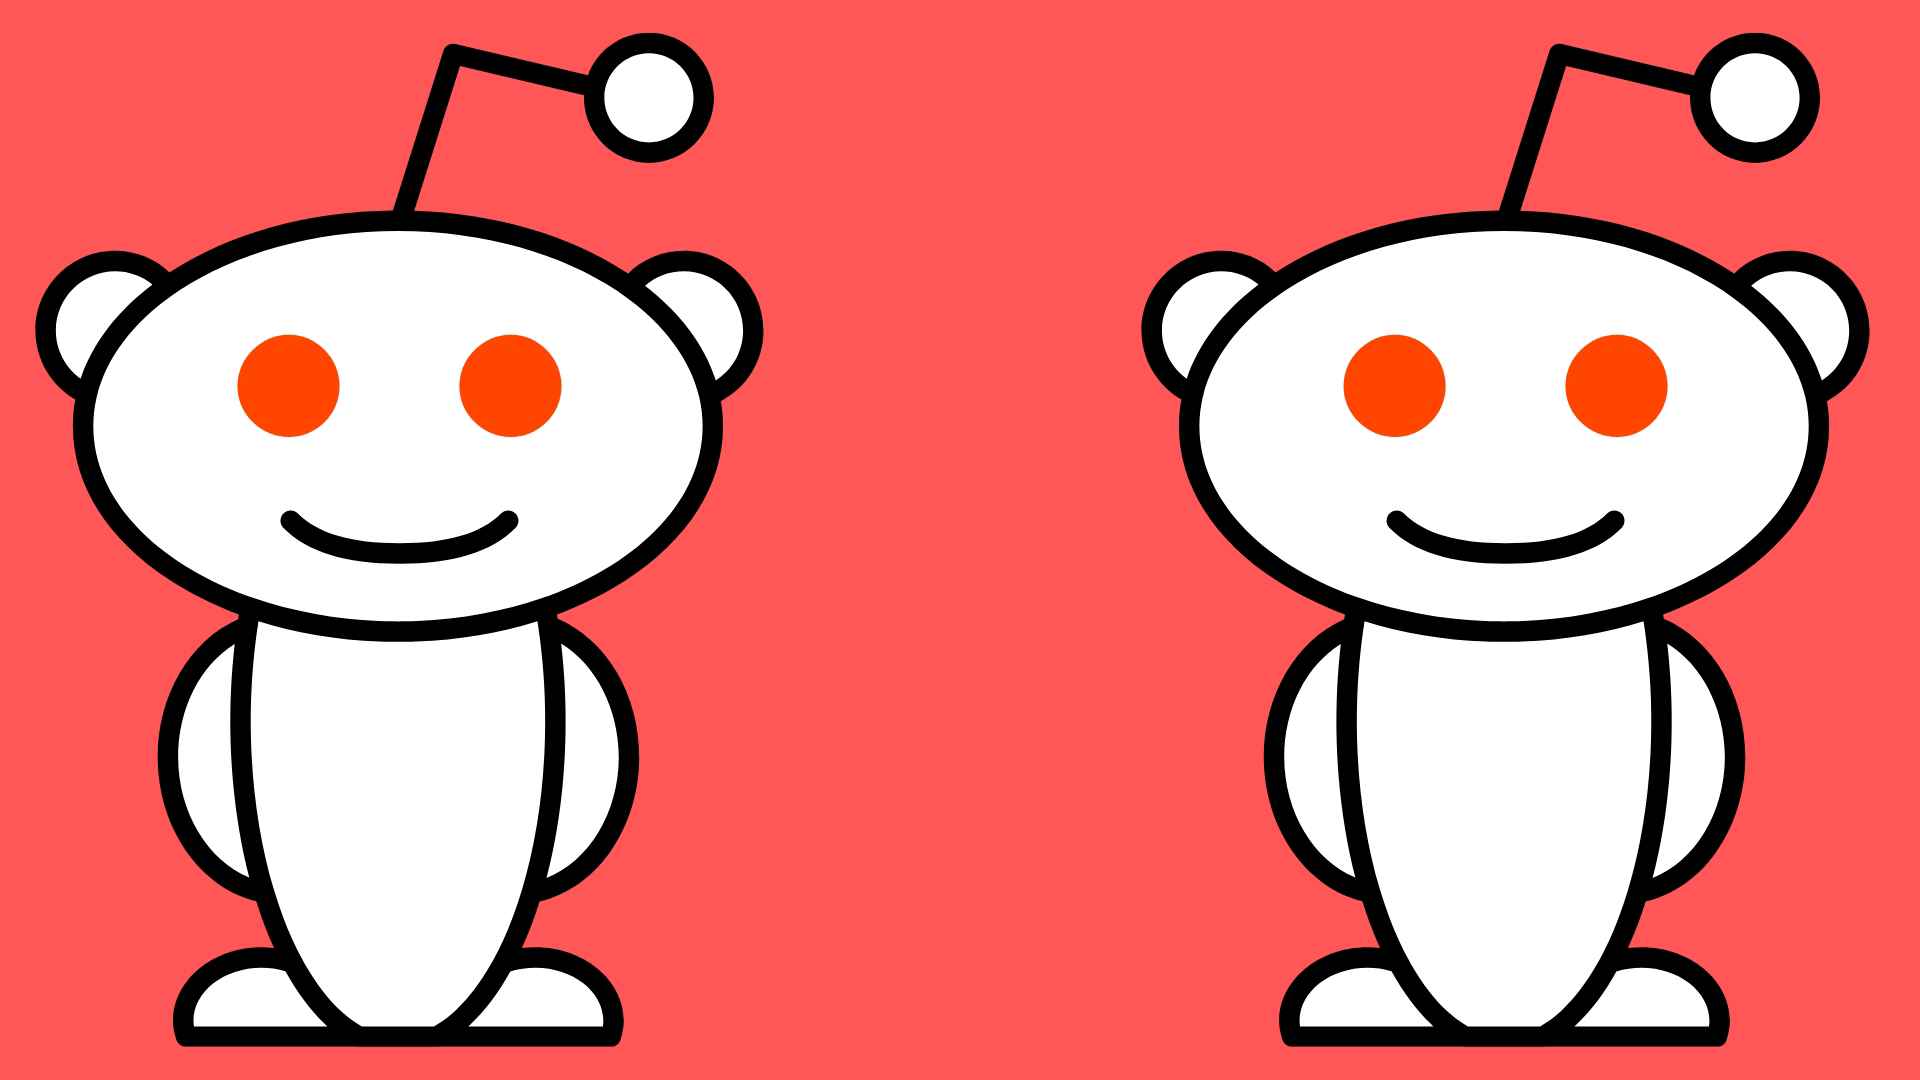 What are some key features of Reddit that make it stand out from other social media platforms?